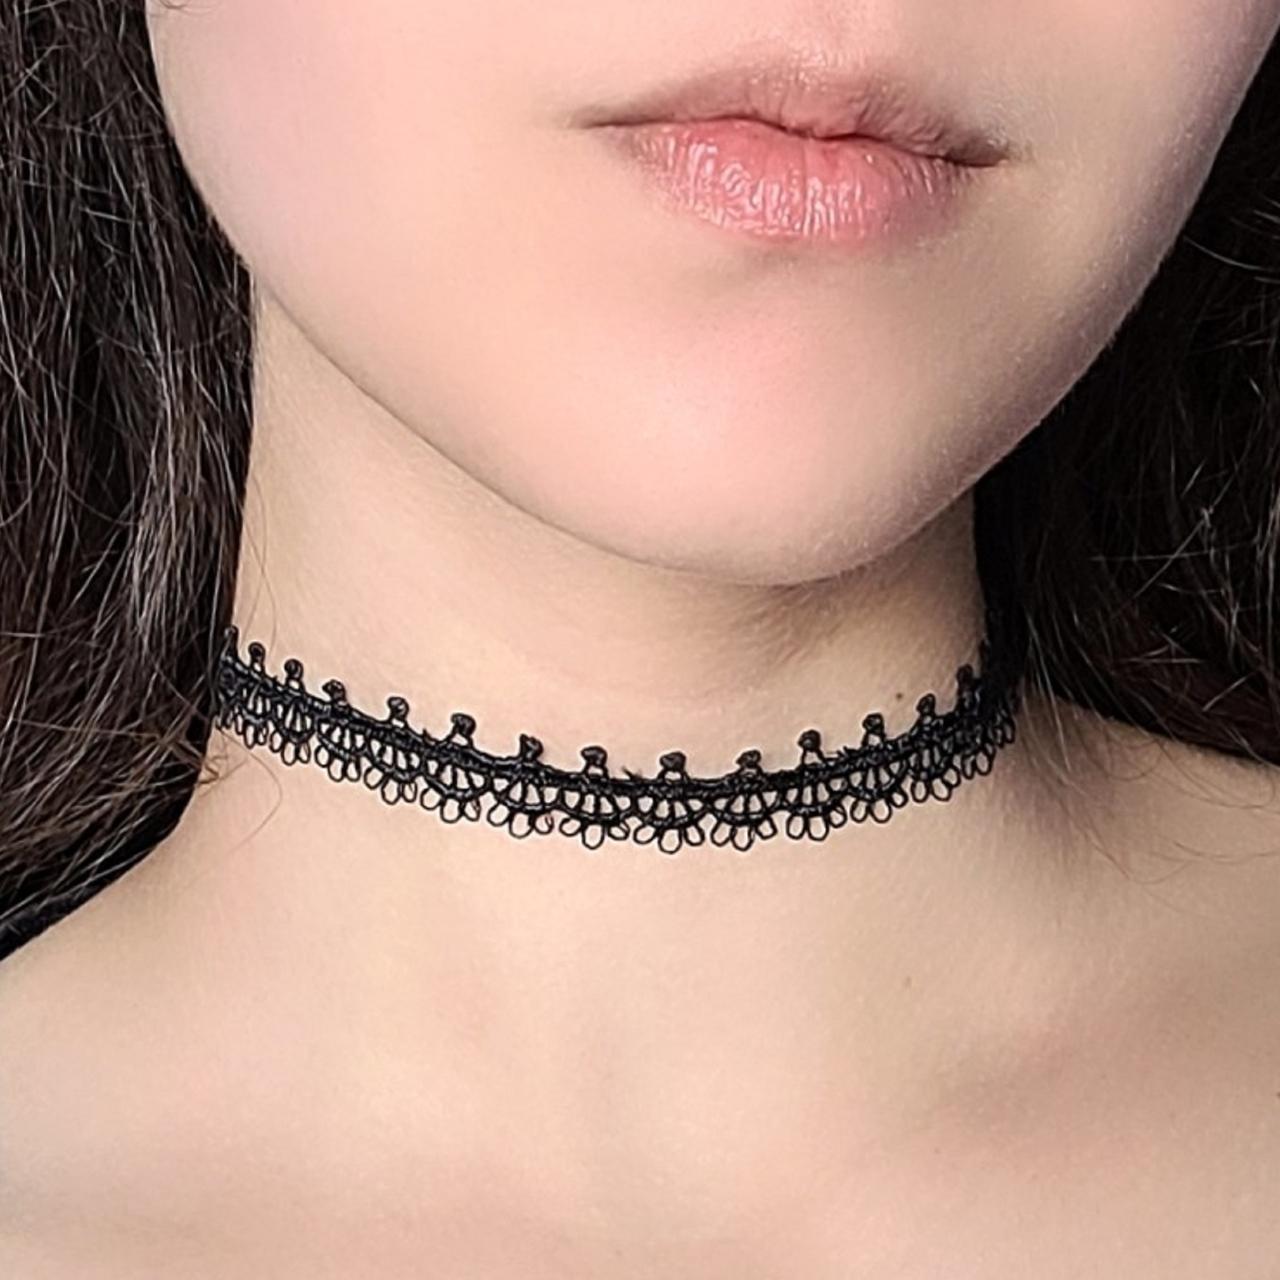 Choker Necklaces Are Back from The 90s - MYKA